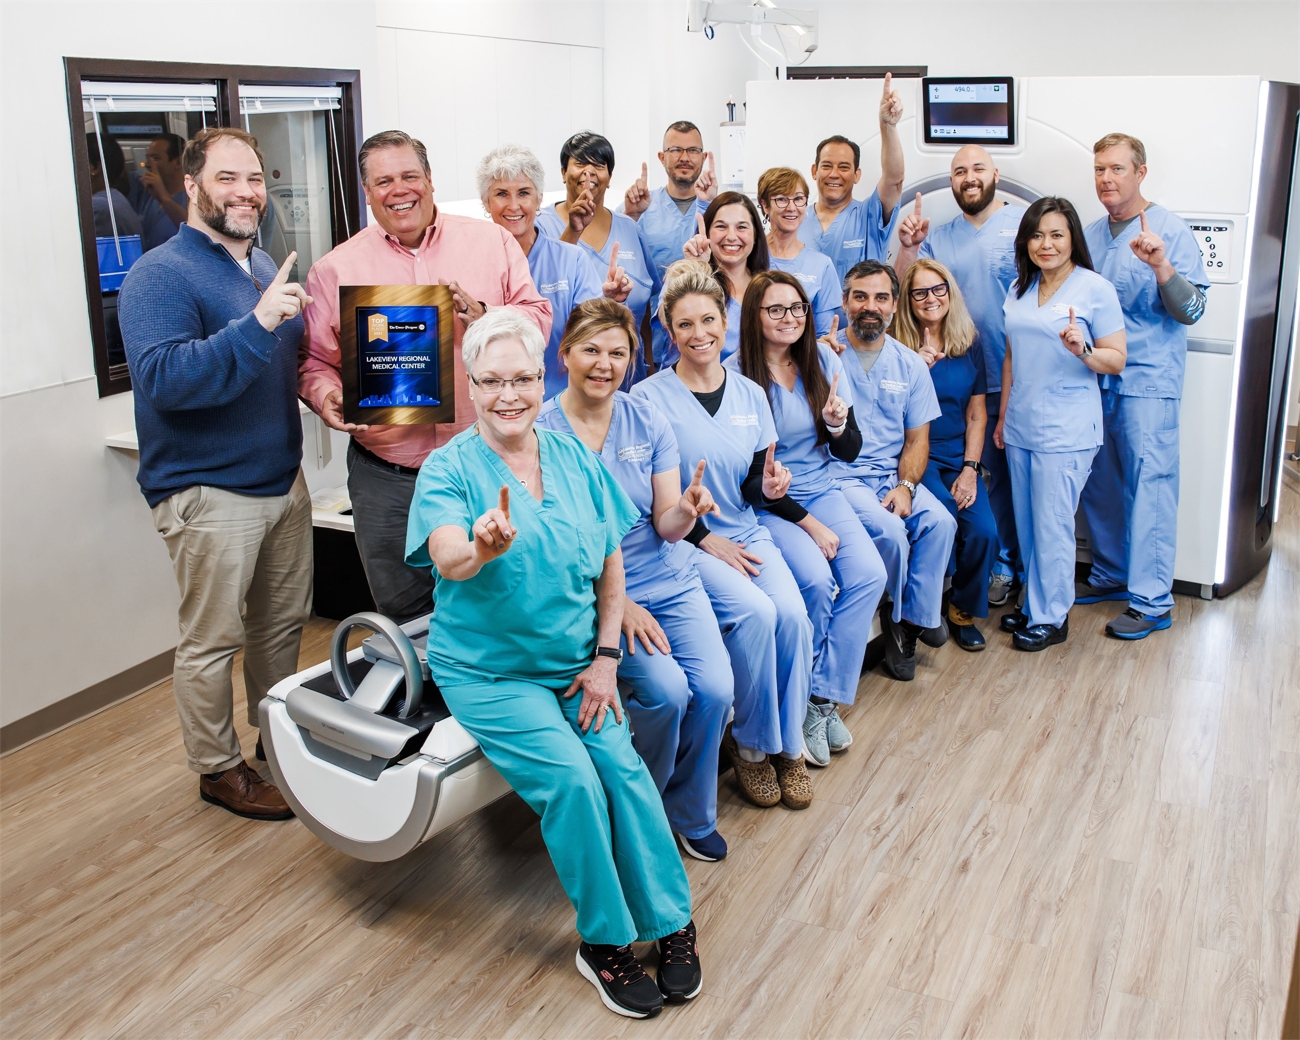 Our Radiology Team Celebrates Being a Top Workplace!